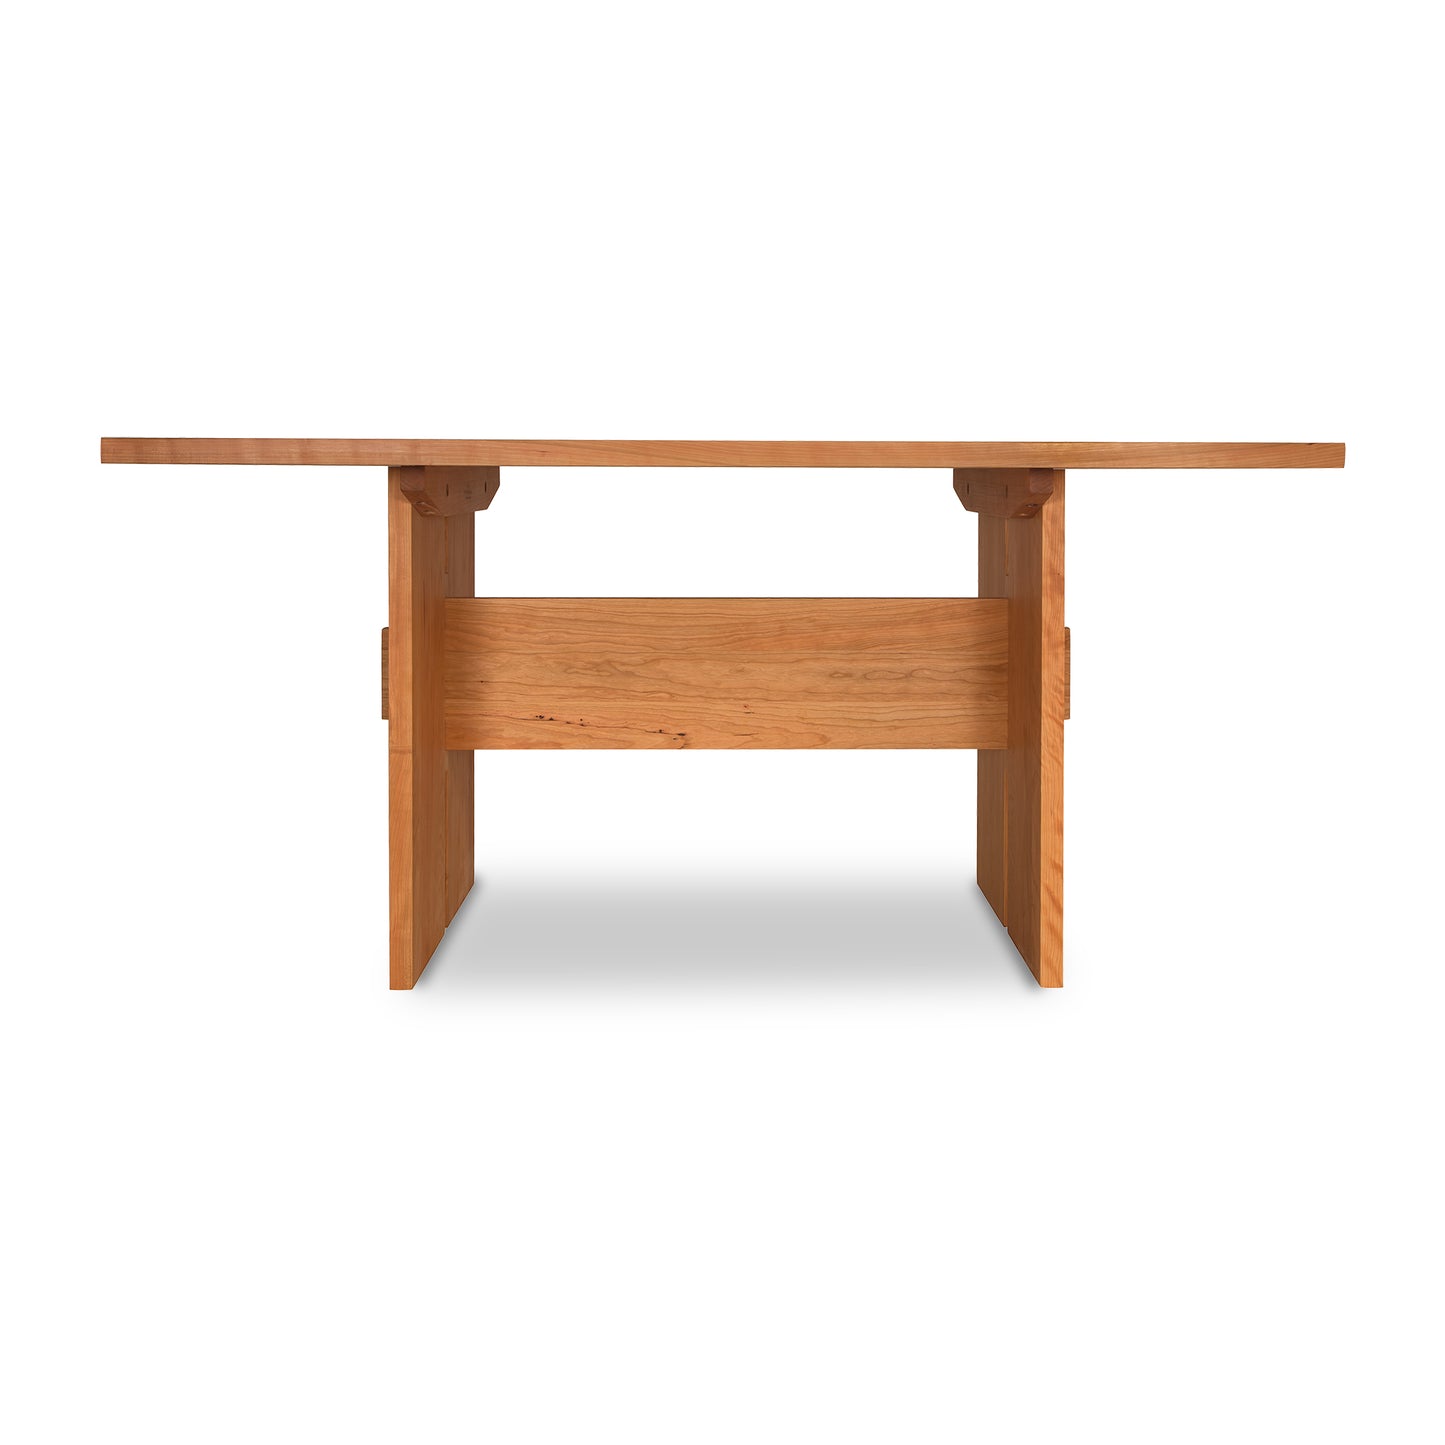 This Vermont Furniture Designs Modern American Dining Table boasts a solid wood construction, featuring a beautifully crafted wooden top.